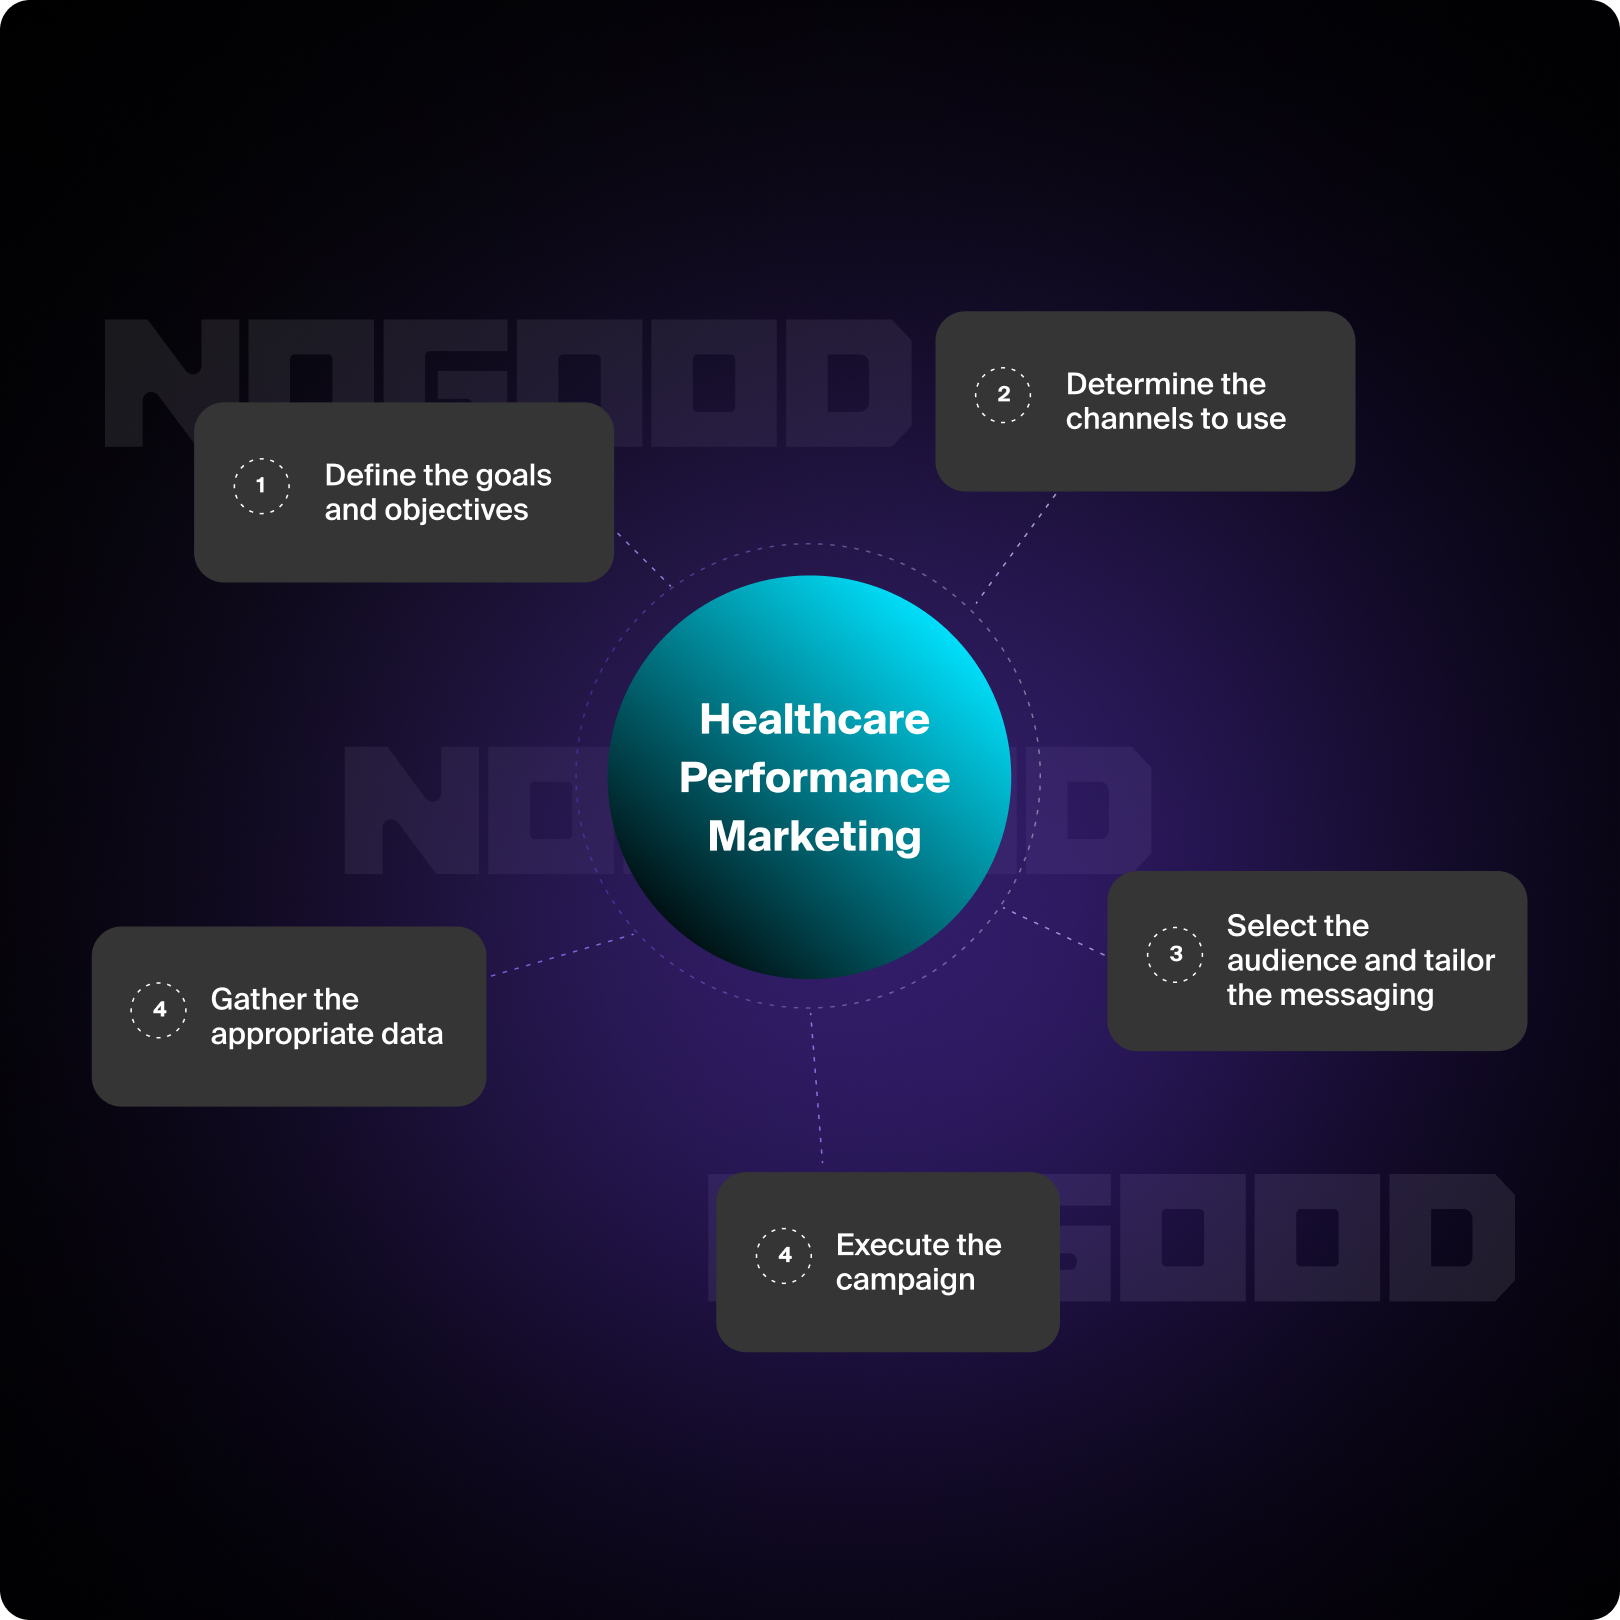 What is healthcare performance marketing?